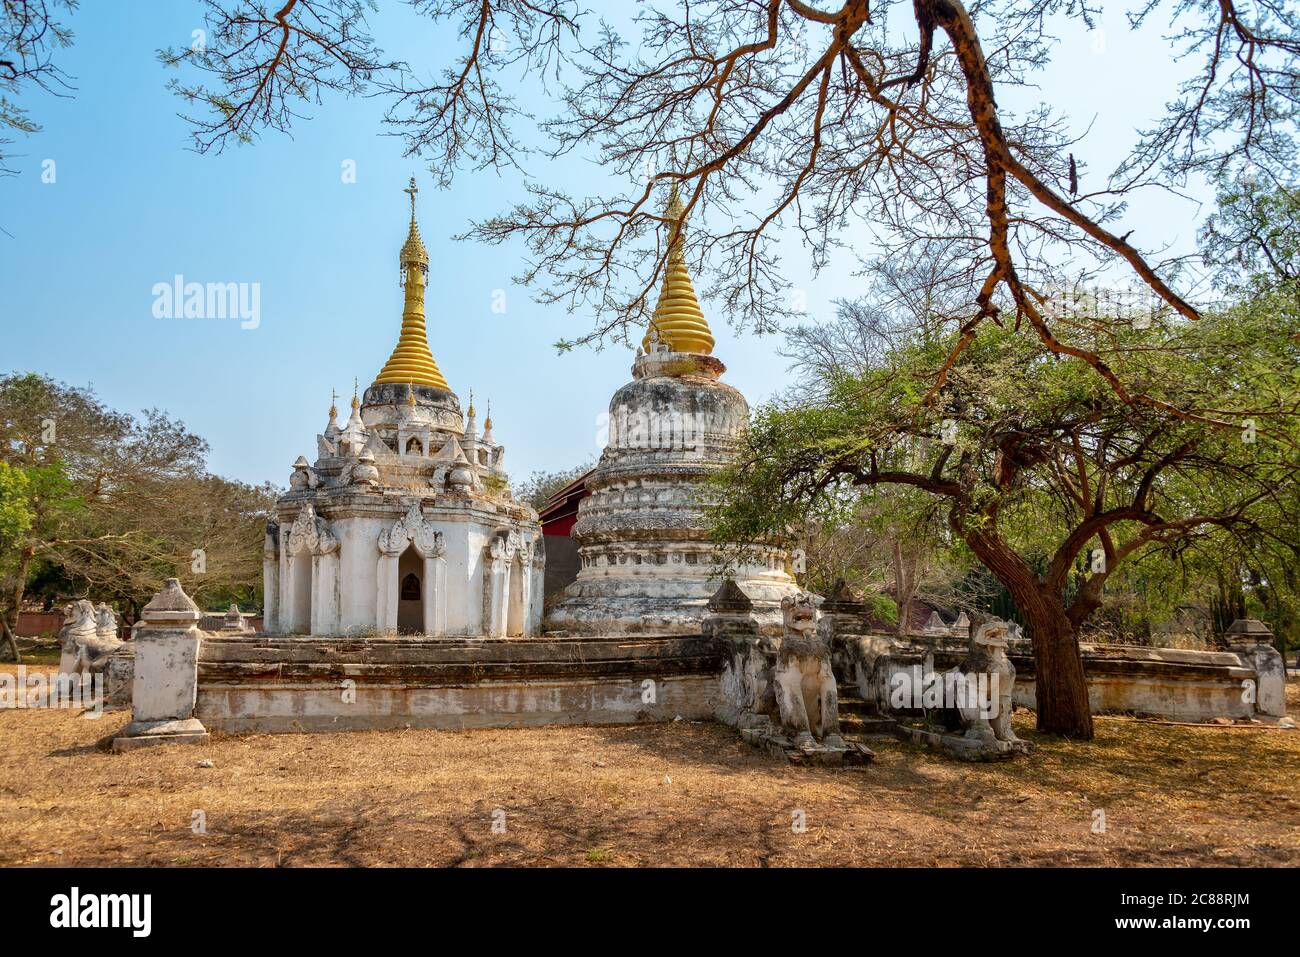 Buddhist white and golden temple in Old Bagan, Burma Myanmar Stock Photo